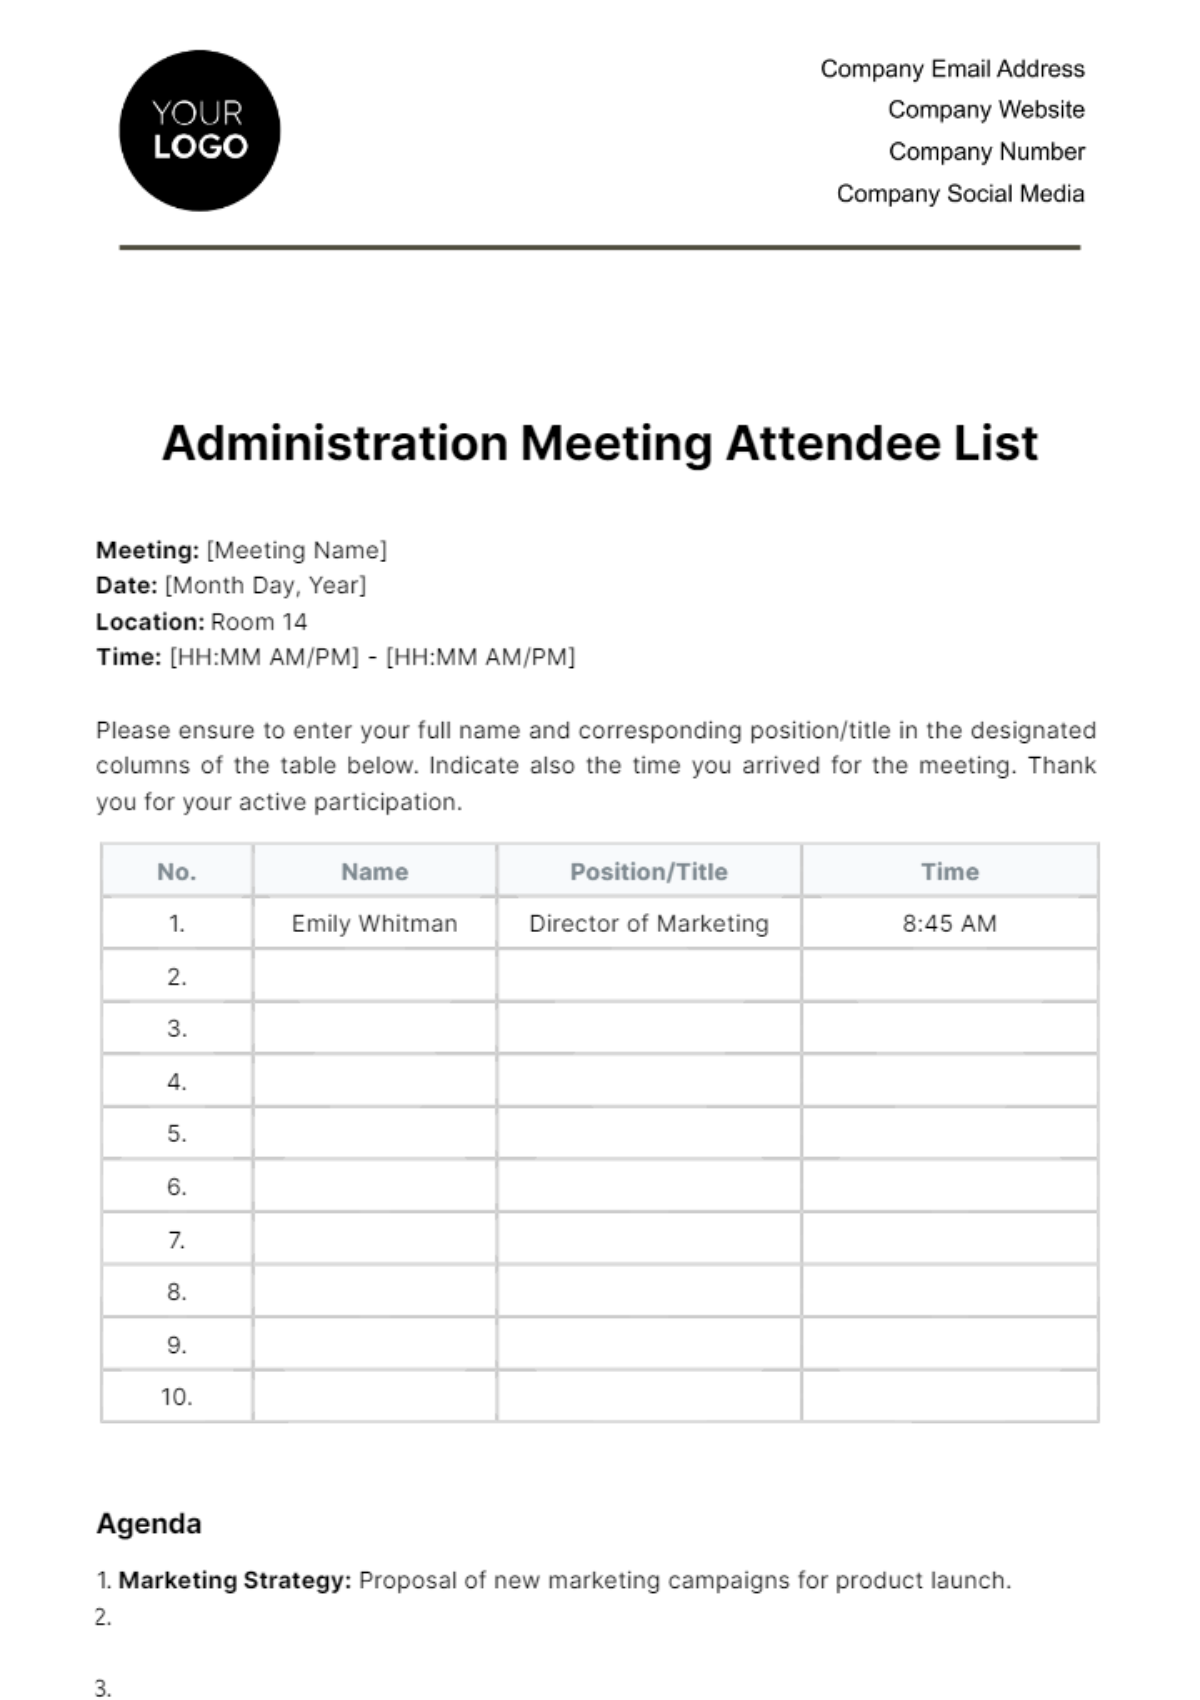 Administration Meeting Attendee List Template